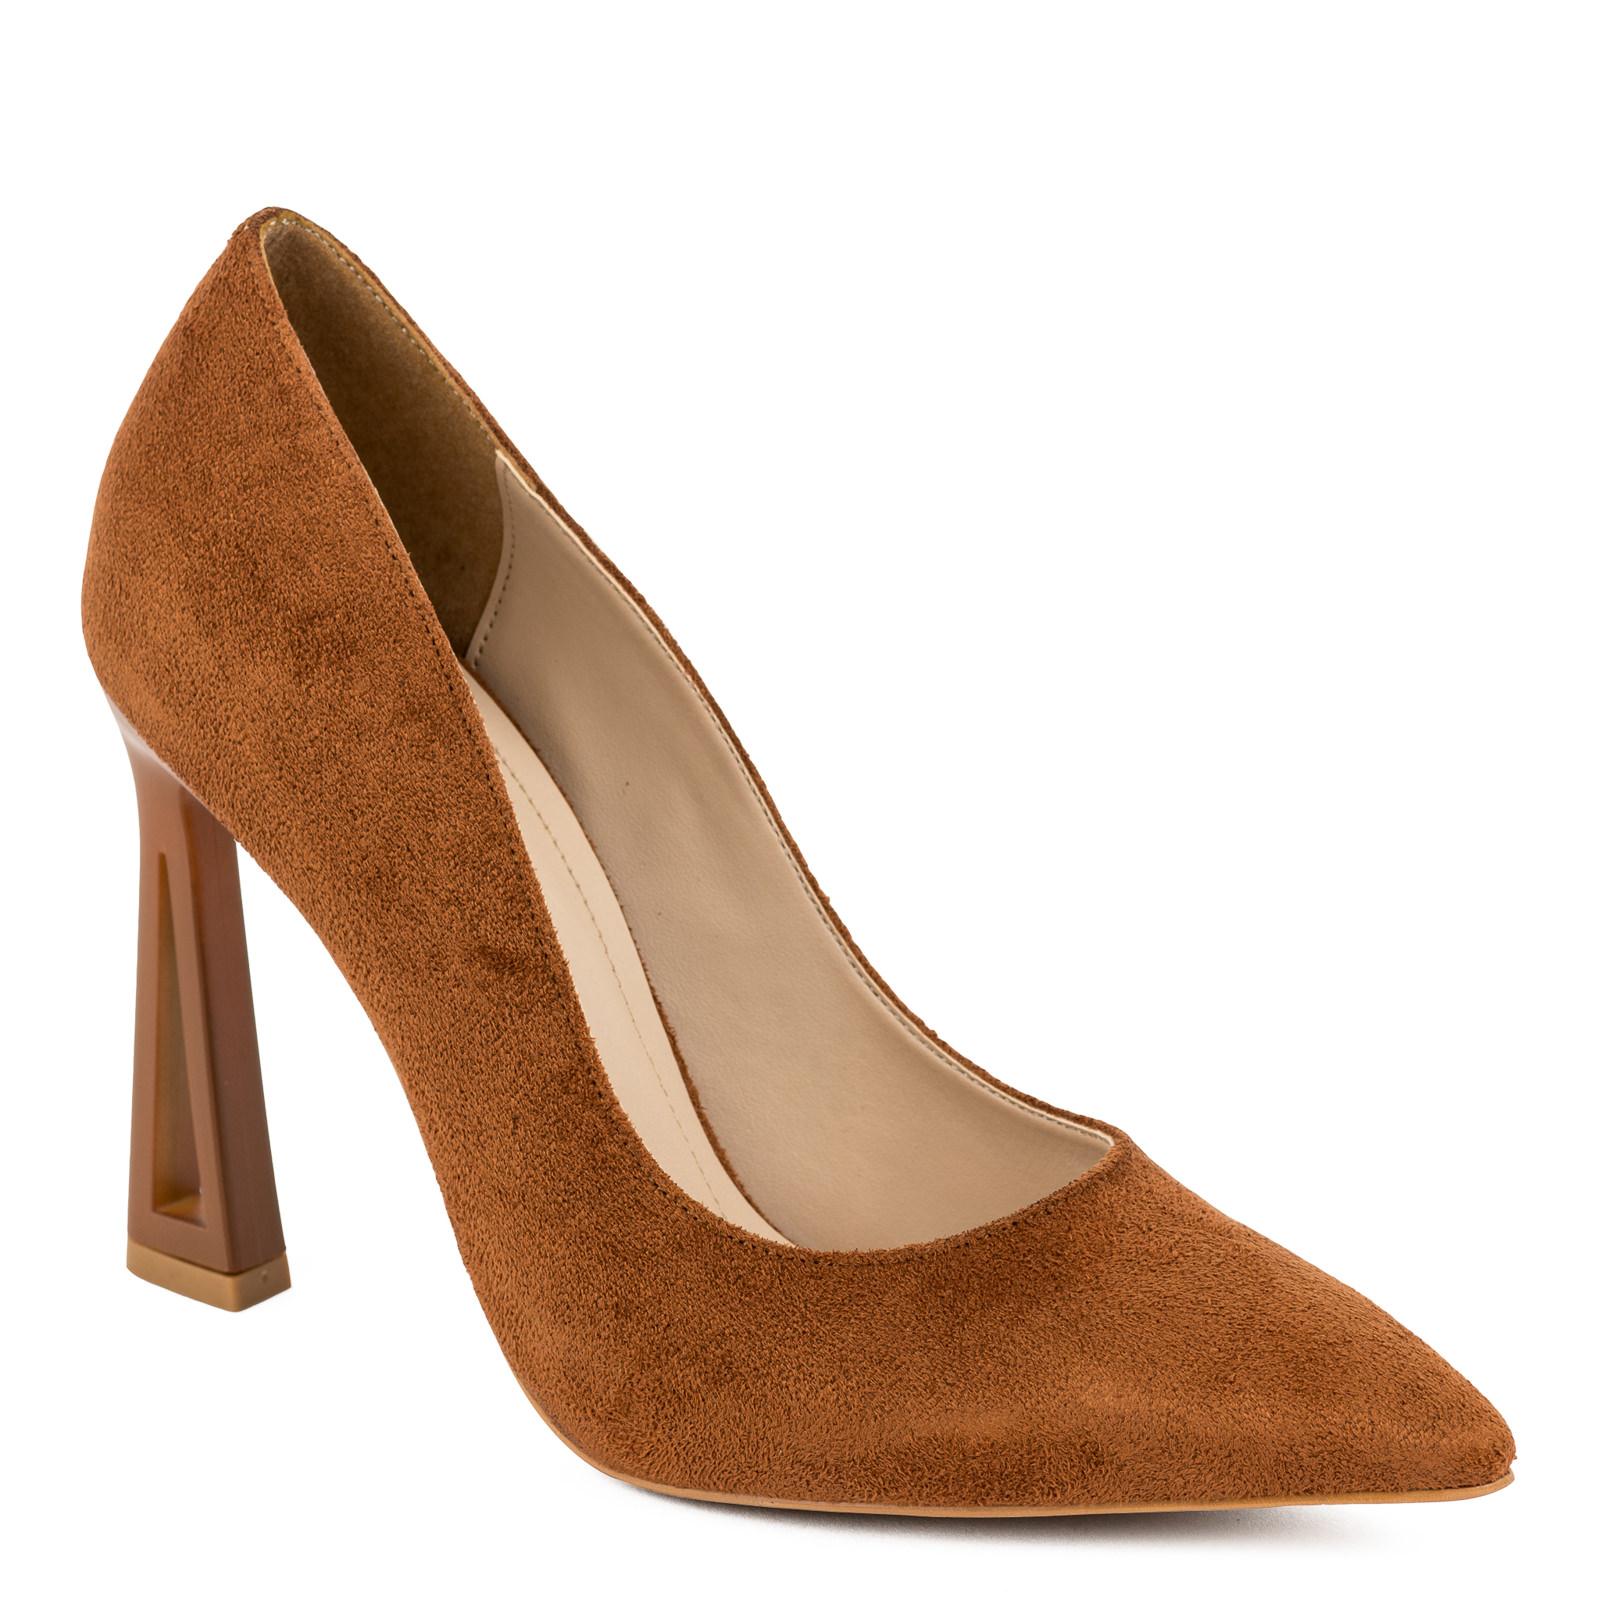 VELOUR POINTED STILETTO WITH THIN HEEL - CAMEL